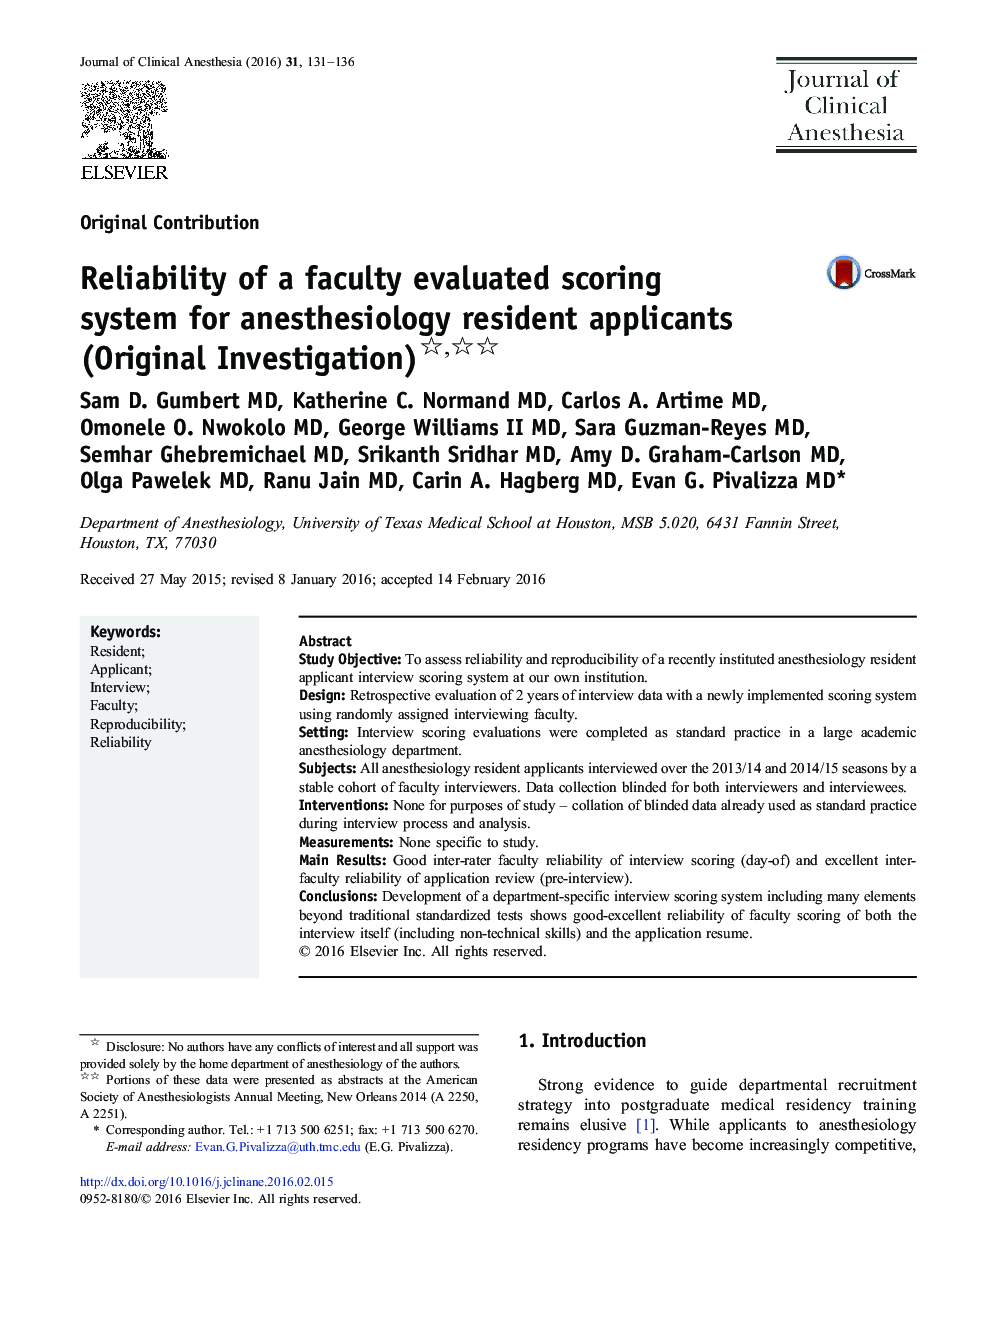 Reliability of a faculty evaluated scoring system for anesthesiology resident applicants (Original Investigation)